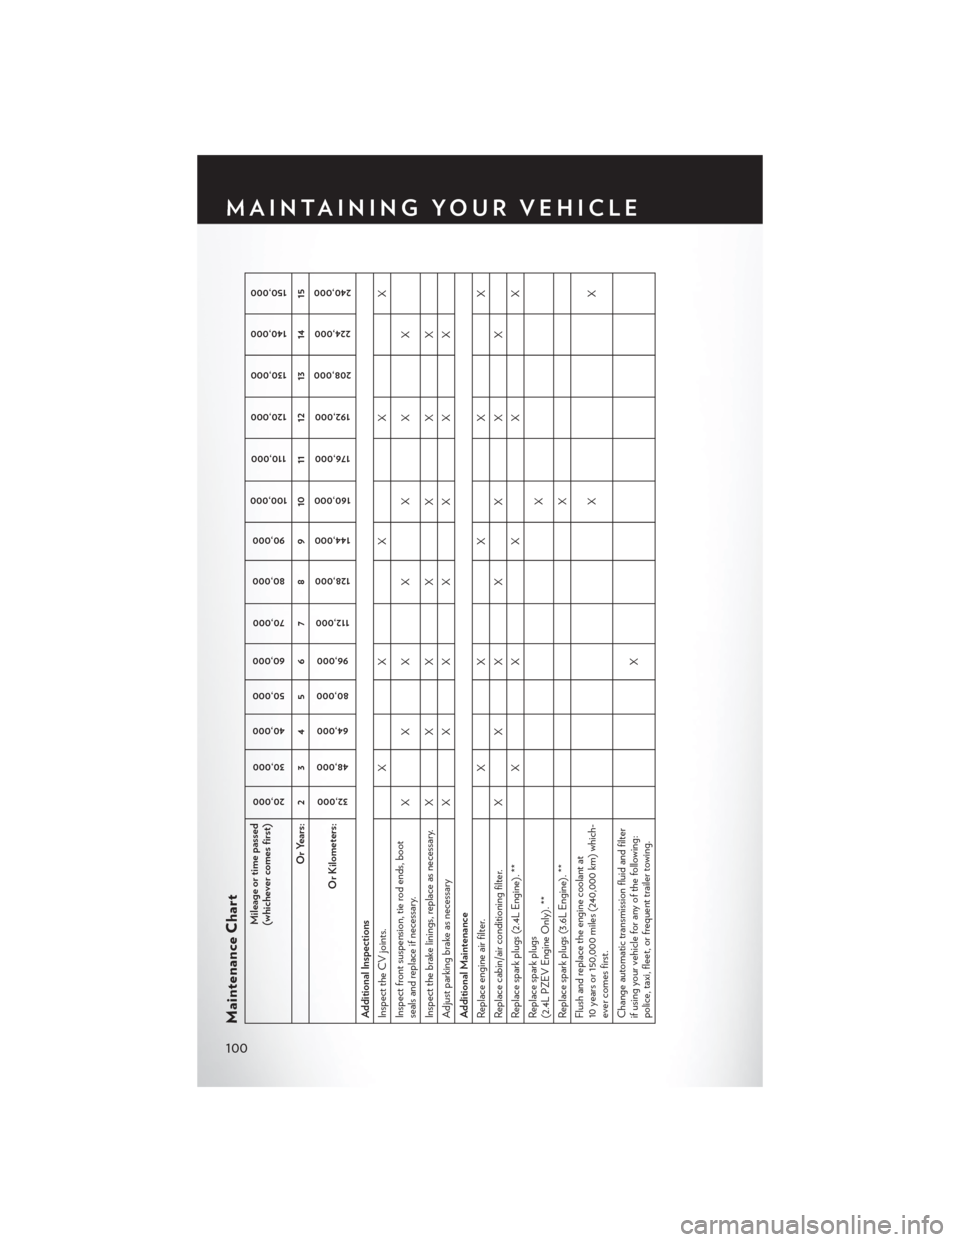 CHRYSLER 200 CONVERTIBLE 2014 1.G User Guide Maintenance Chart
Mileage or time passed
(whichever comes first)
20,000
30,000
40,000 50,000
60,000
70,000
80,000 90,000
100,000
110,000
120,000 130,000
140,000 150,000
Or Years: 2 3 4 5 6 7 8 9 10 11